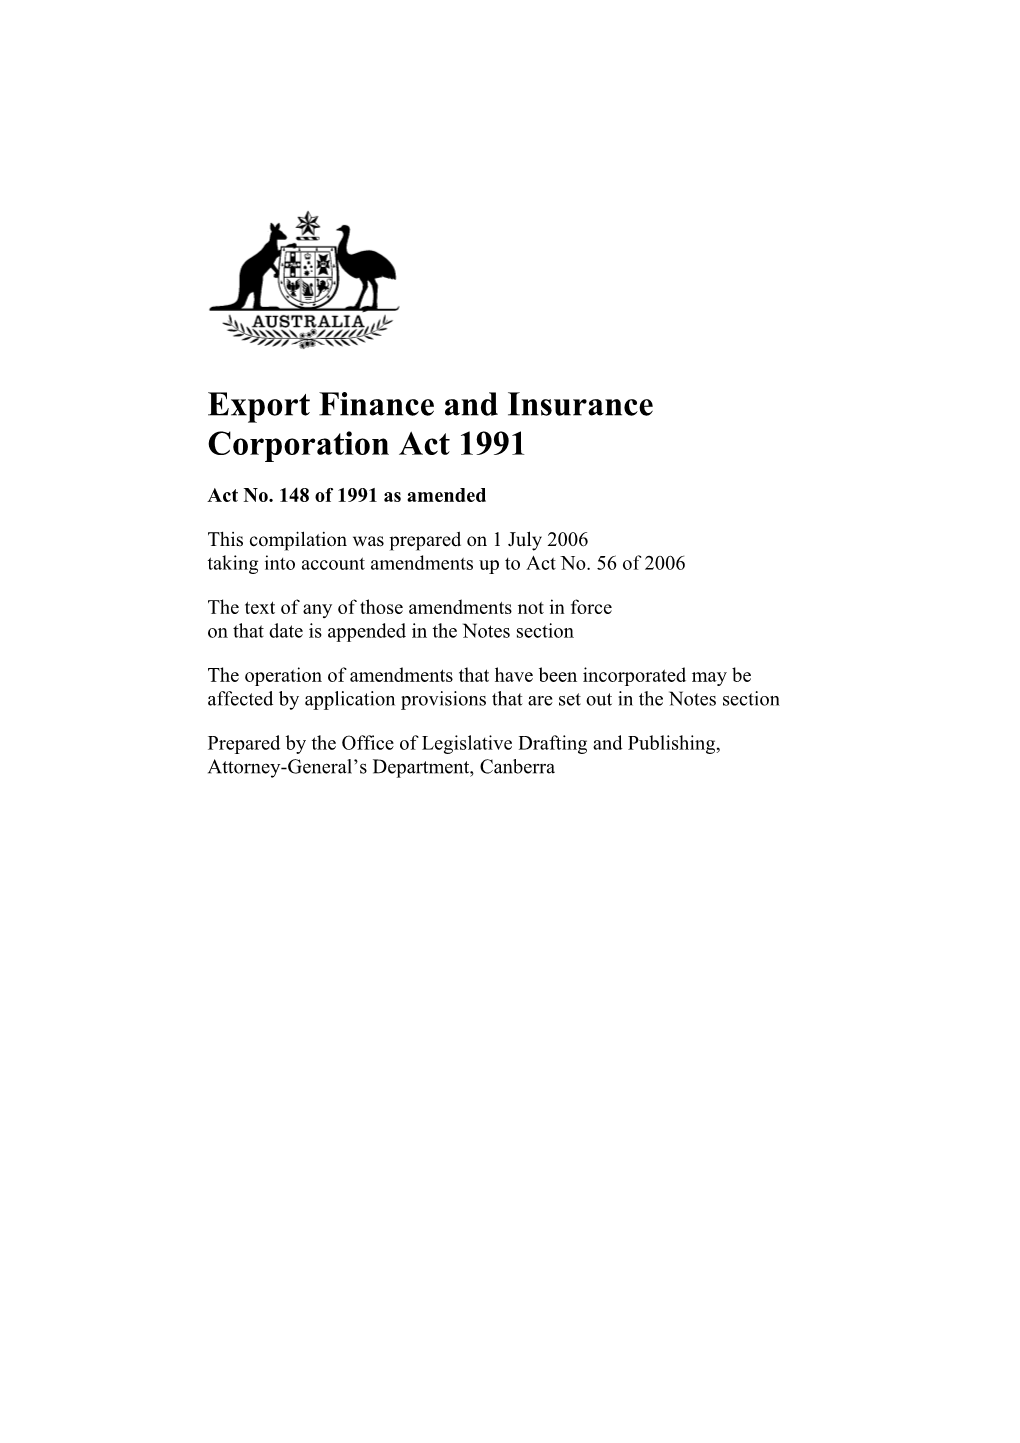 Export Finance and Insurance Corporation Act 1991